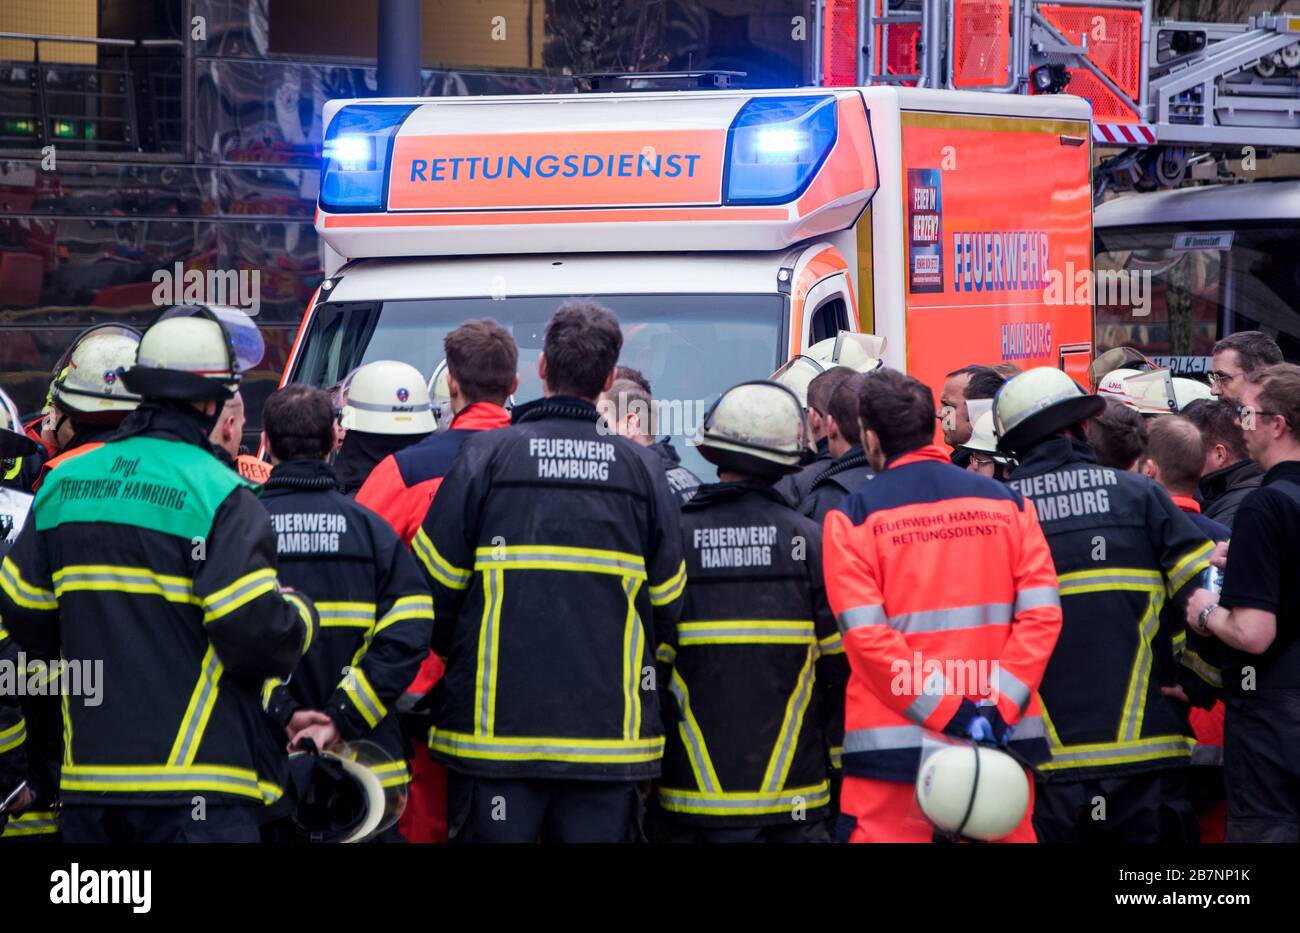 Hamburg, Germany. 17th Mar, 2020. Emergency services of the fire brigade and police are standing at an ambulance next to a collapsed scaffold at a construction site. At Hamburg's Millerntorplatz on Tuesday afternoon, scaffolding toppled over and buried two people beneath it. Credit: Daniel Bockwoldt/dpa/Alamy Live News Stock Photo